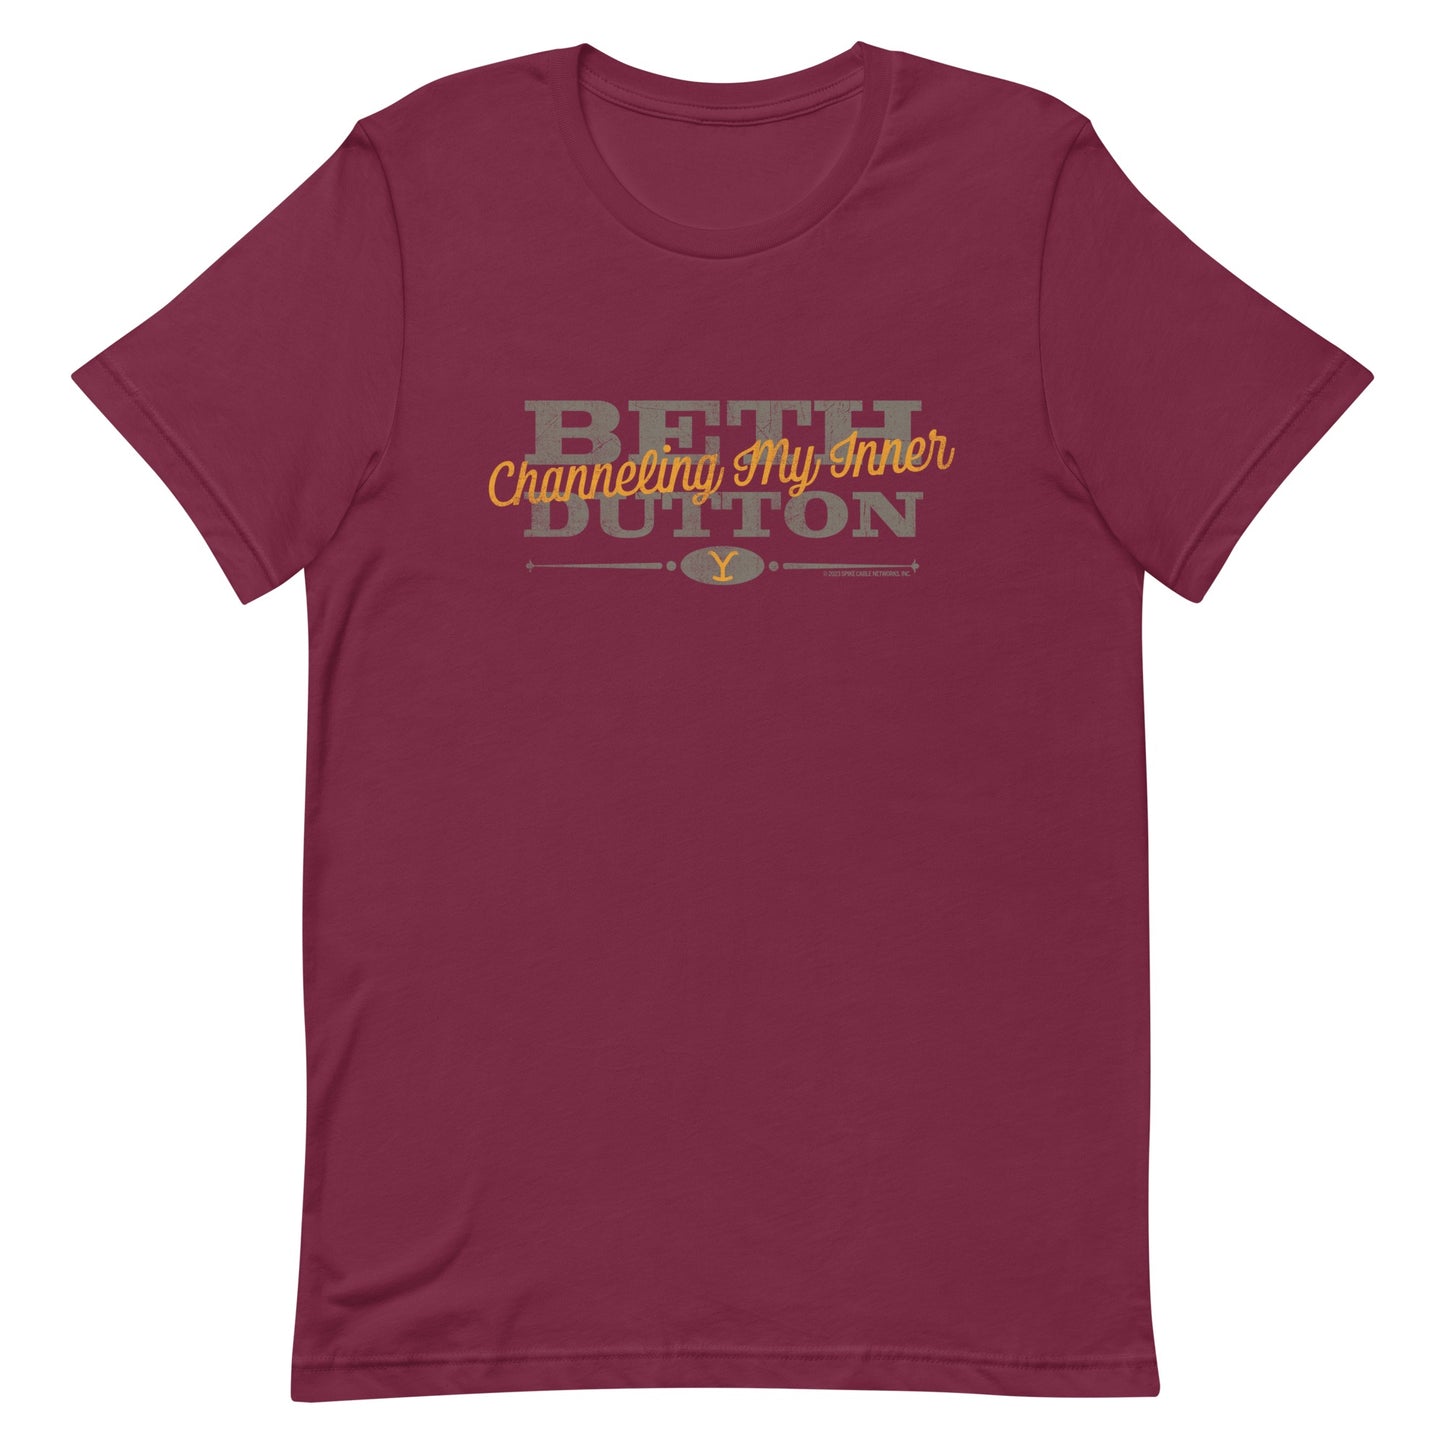 Yellowstone Channeling My Inner Beth Dutton T-Shirt – Paramount Shop